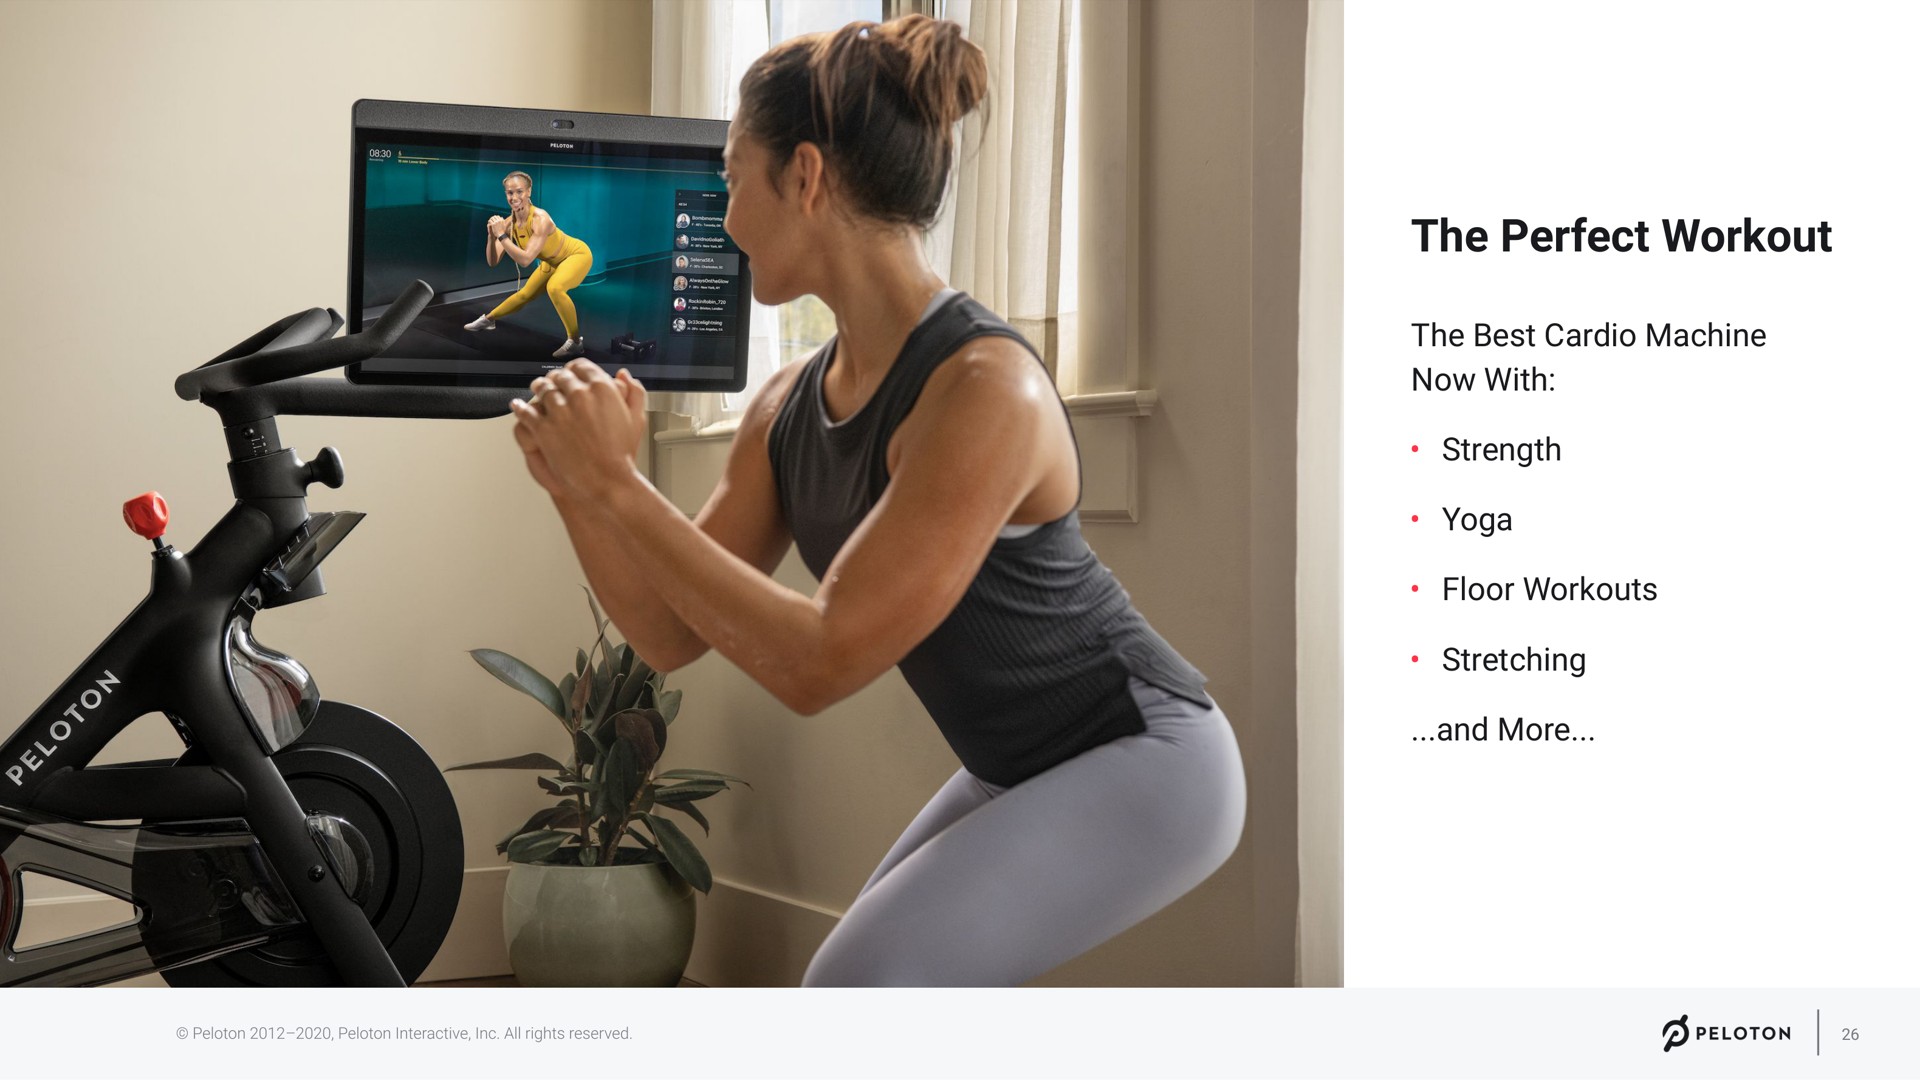 the perfect workout the best machine now with strength yoga floor workouts stretching and more | Peloton